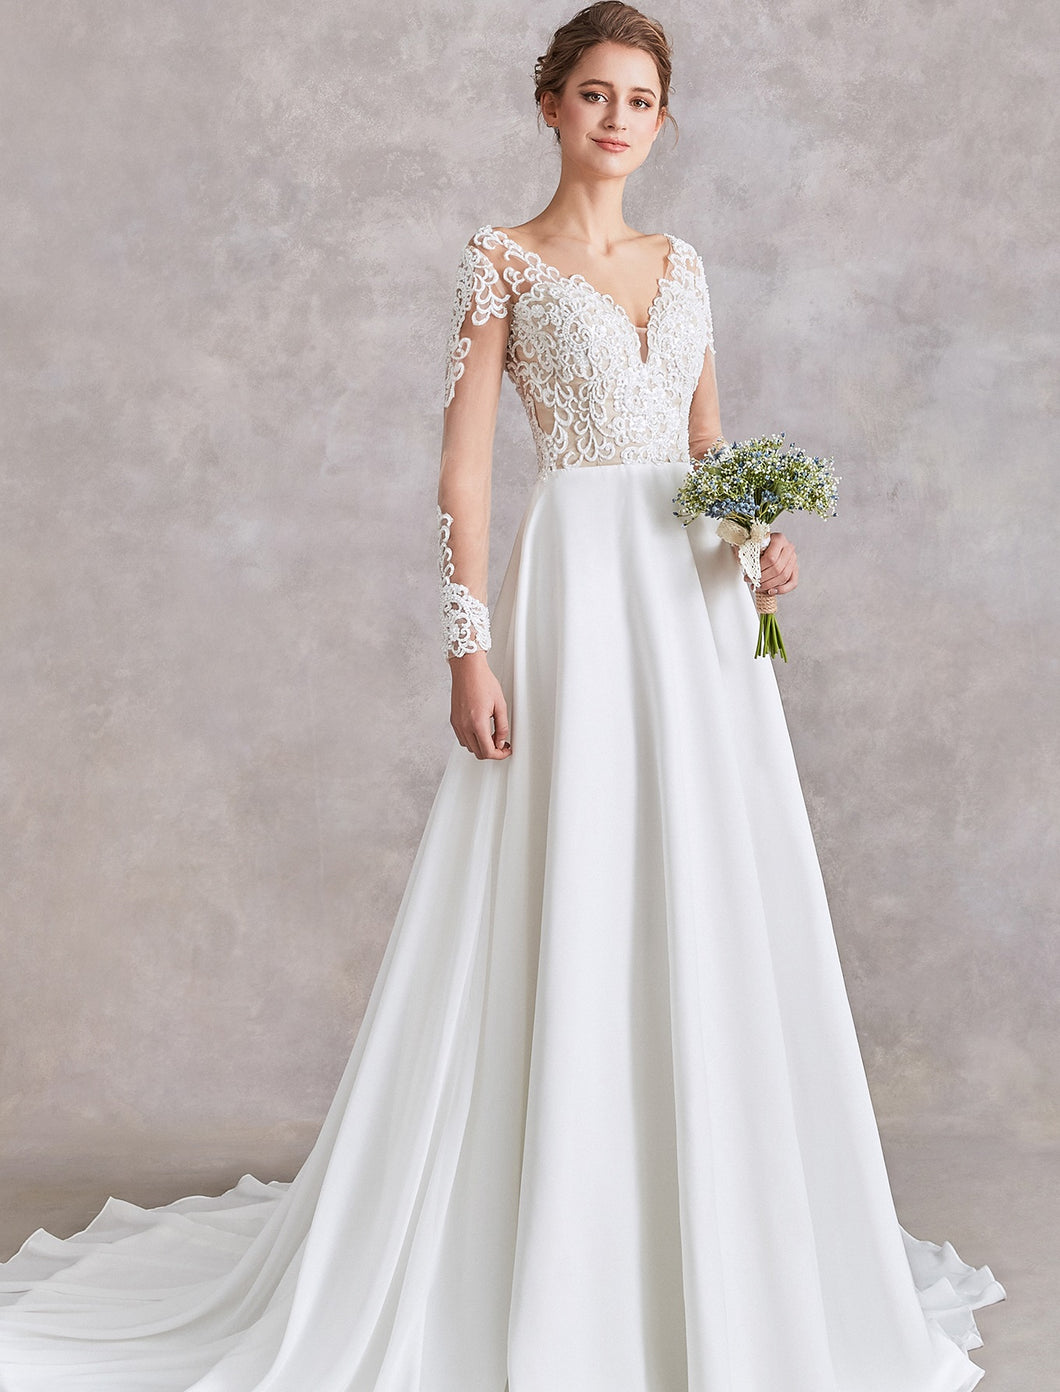 71122  Beautiful bohemian wedding gown. Features a flowy skirt and beaded top